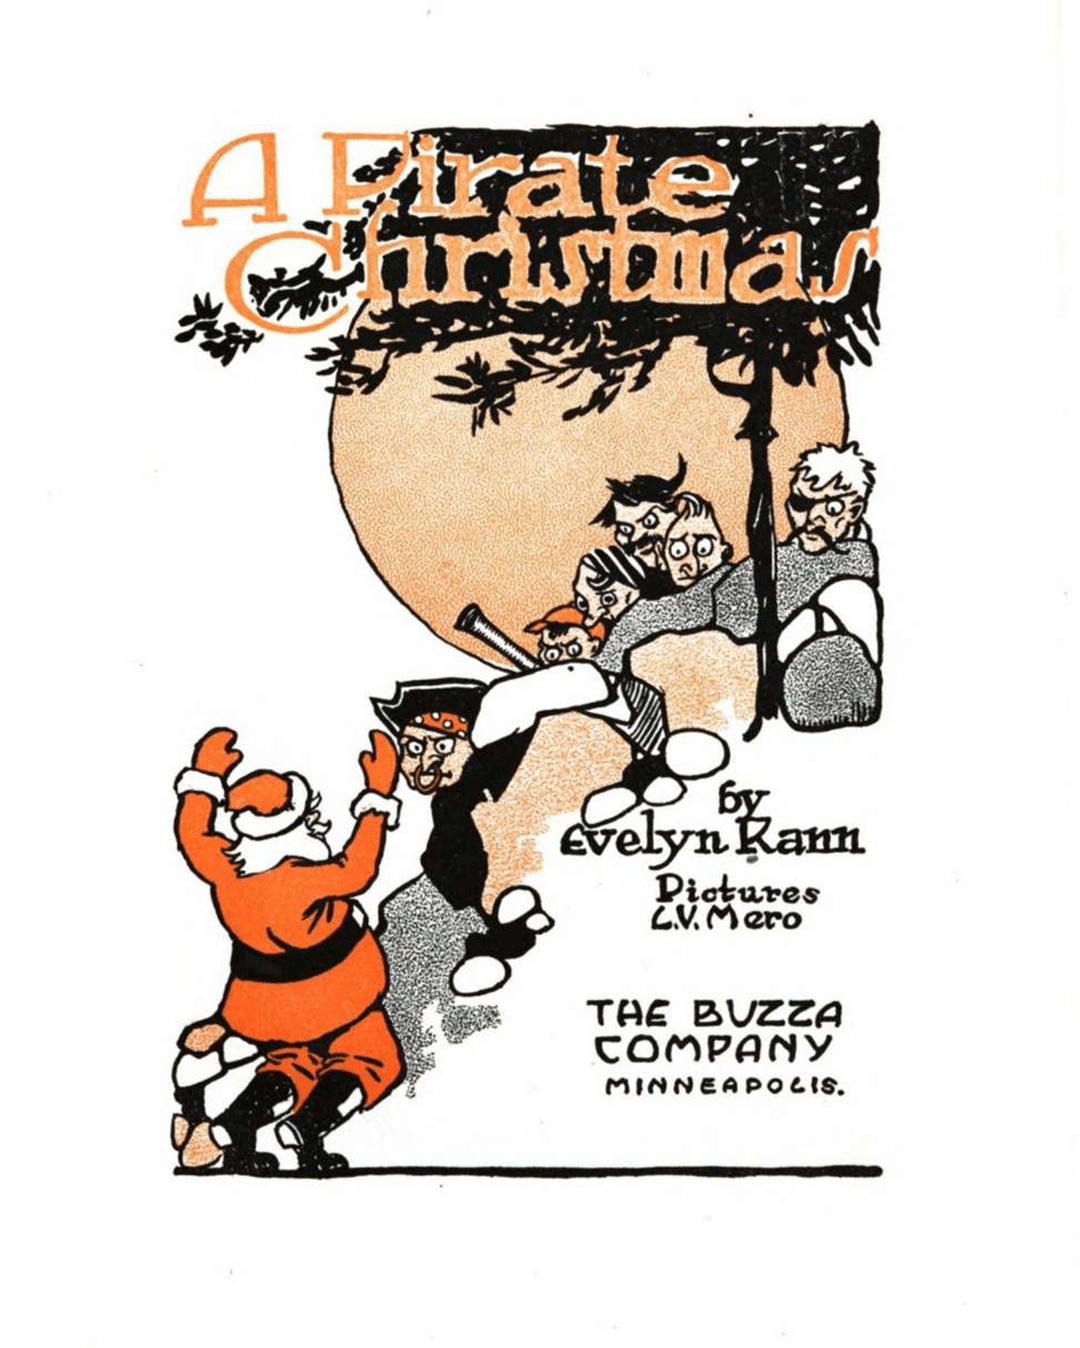 A Pirate Christmas #1 image number 0